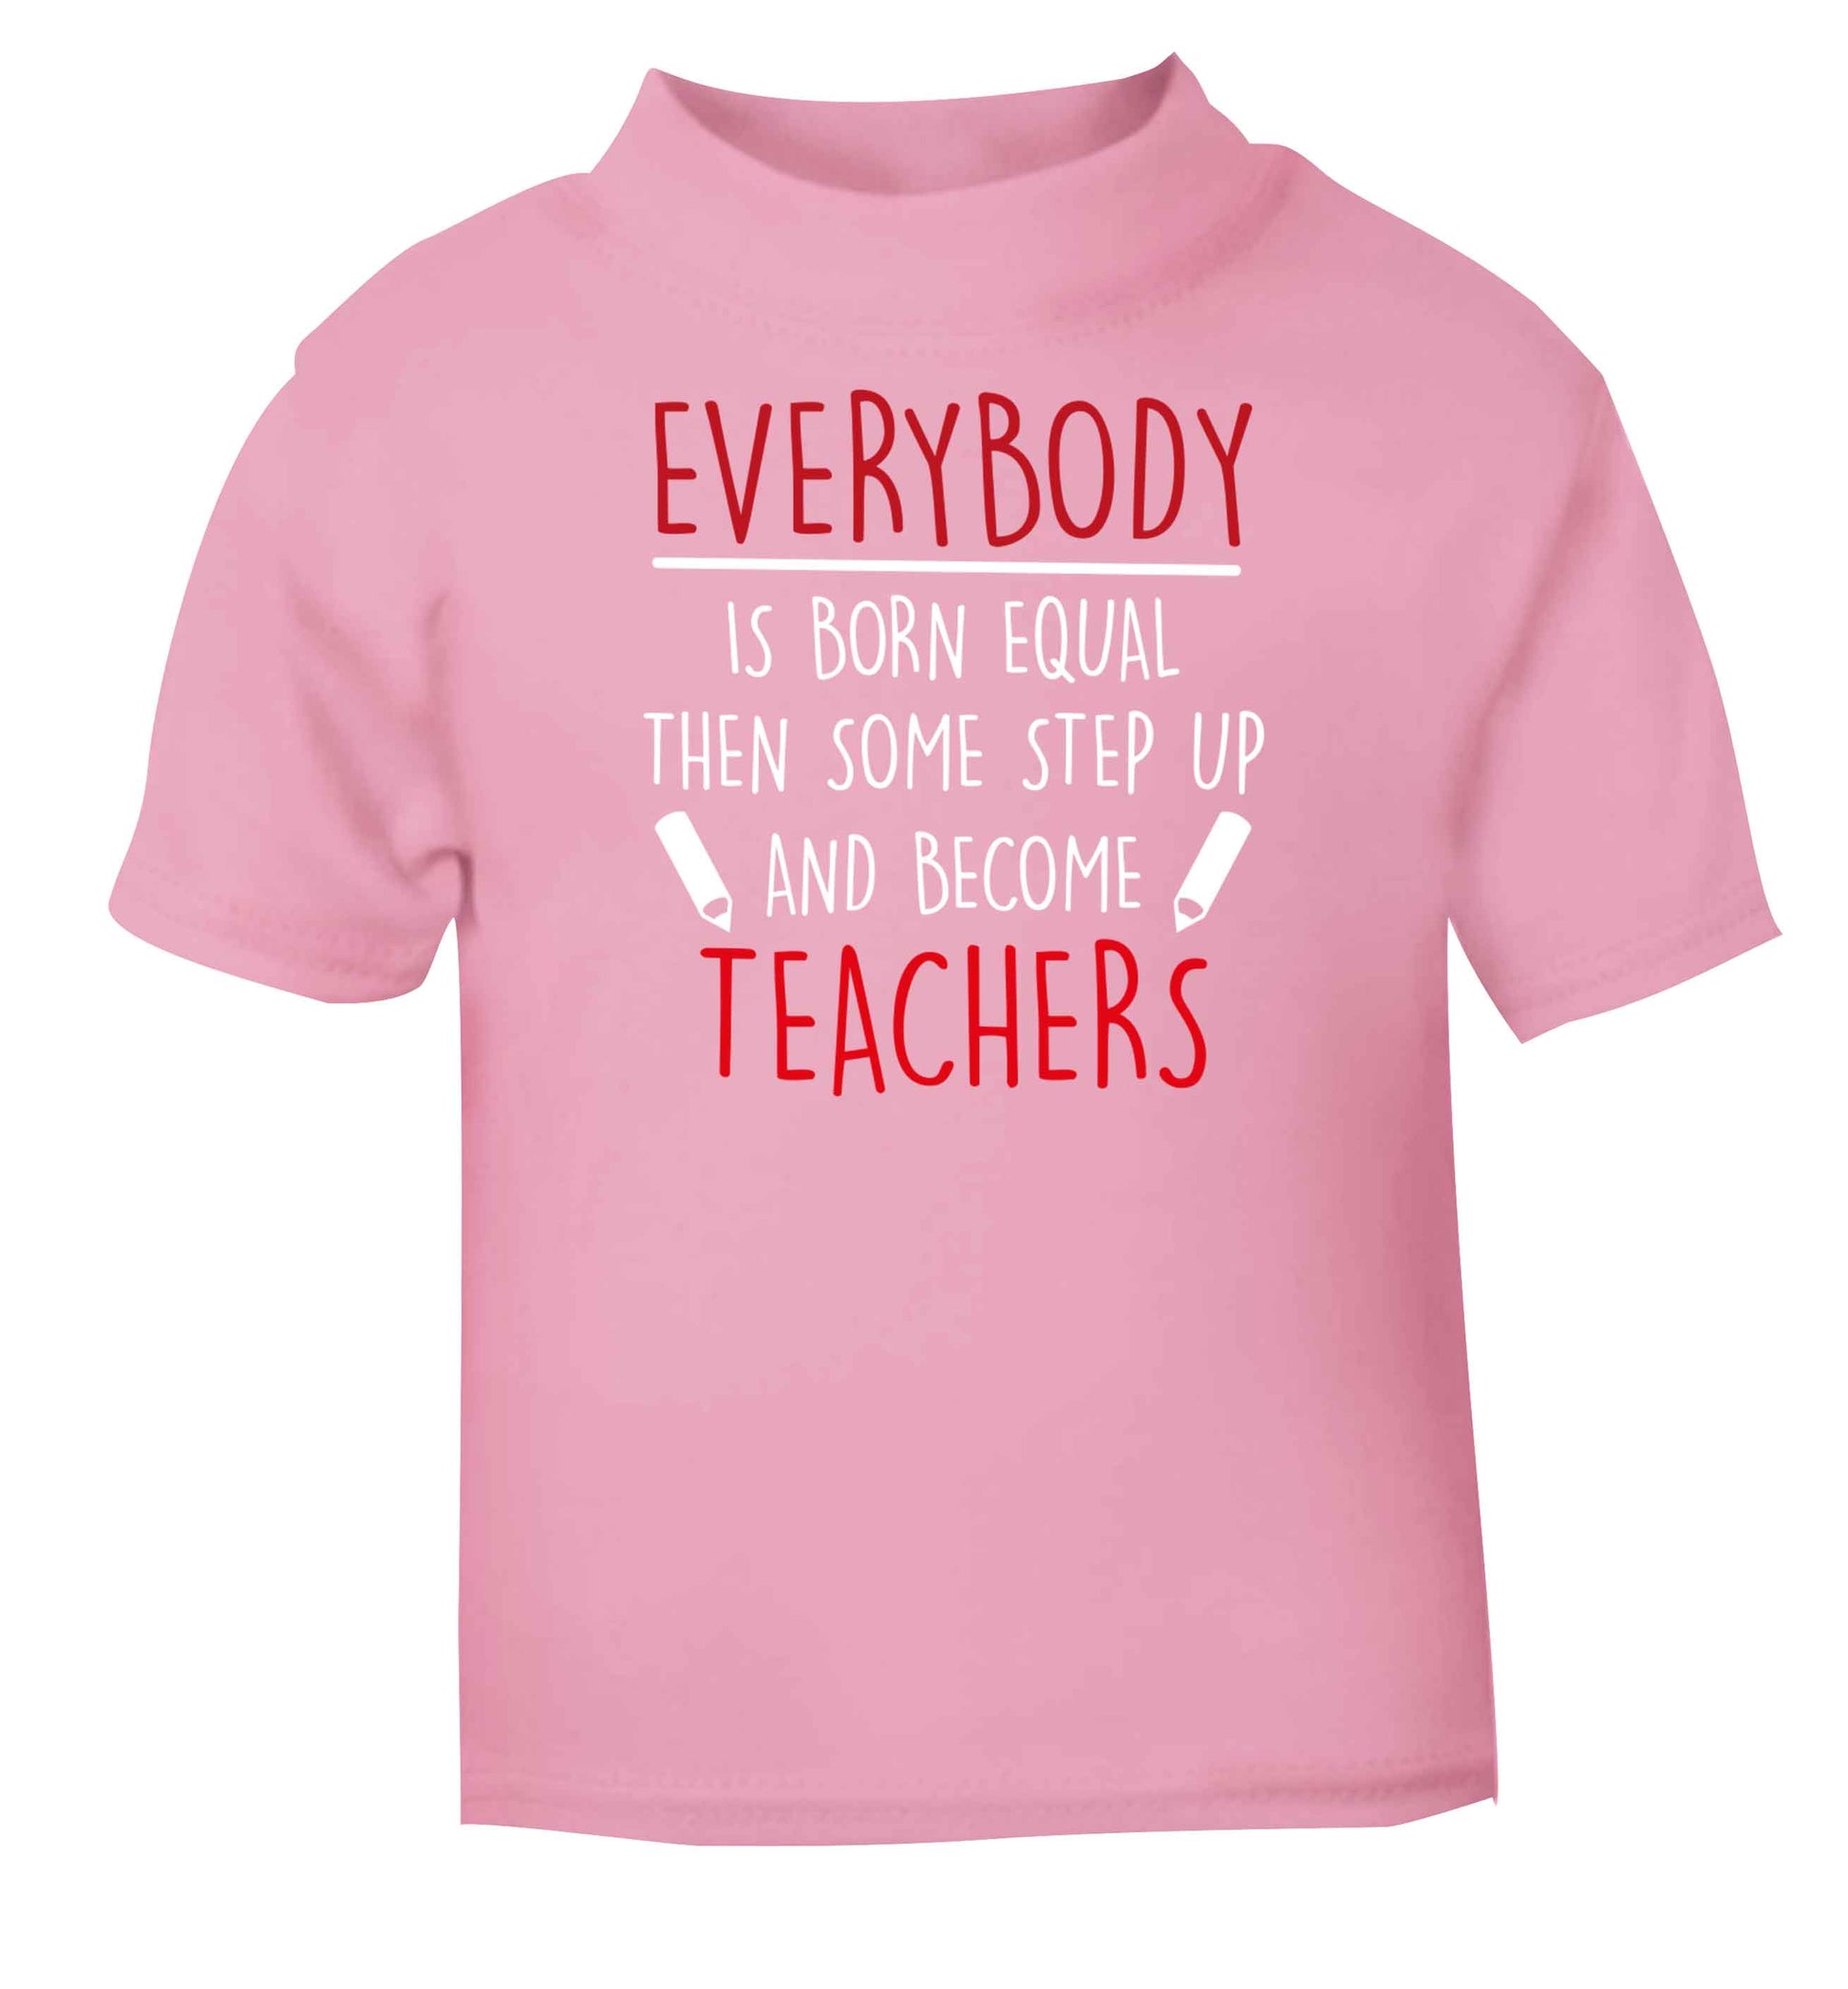 Everybody is born equal then some step up and become teachers light pink baby toddler Tshirt 2 Years